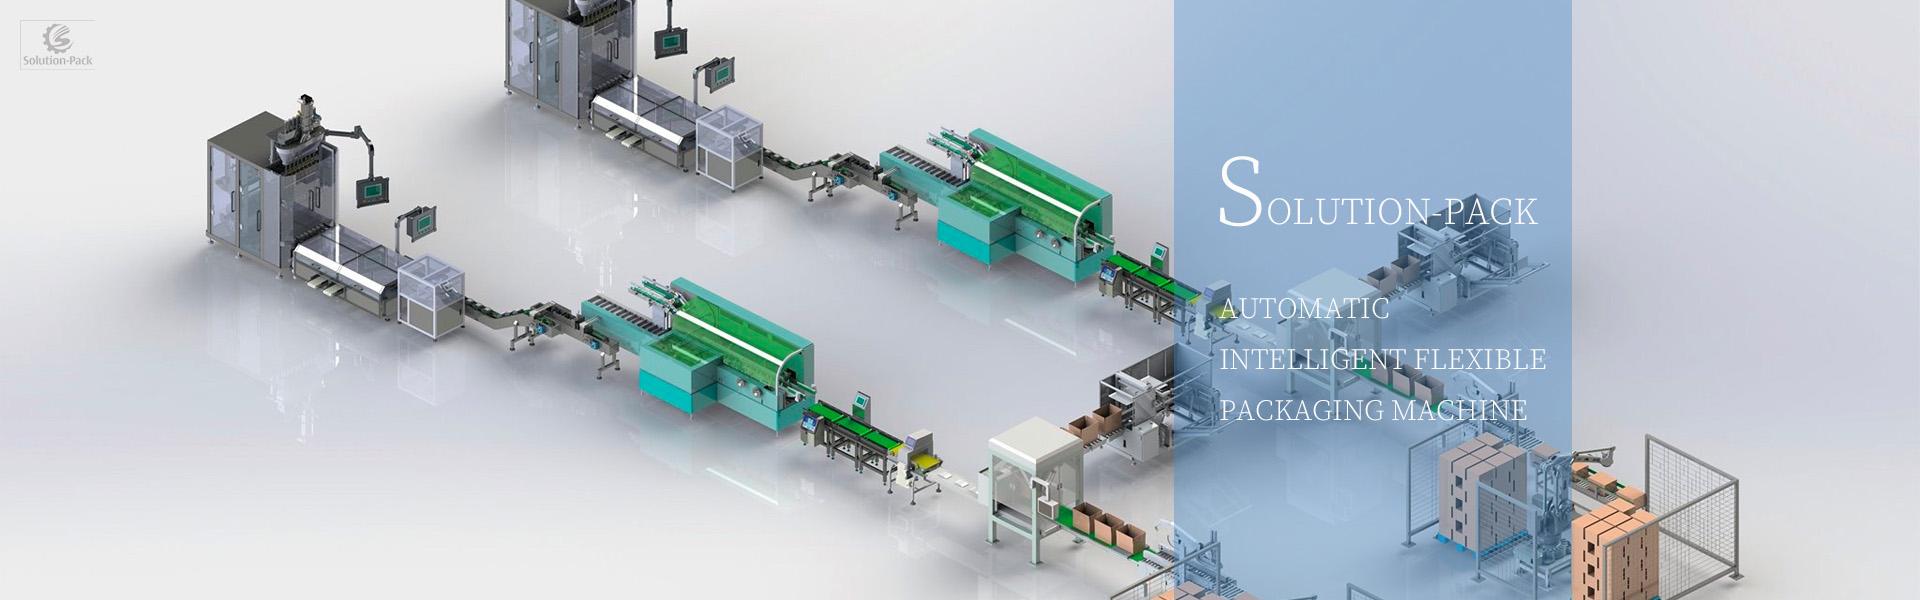 Solution-Pack | Intelligent Flexible Packaging Machine Equipment | Automatic Packaging Machine System | Middle Banner Picture